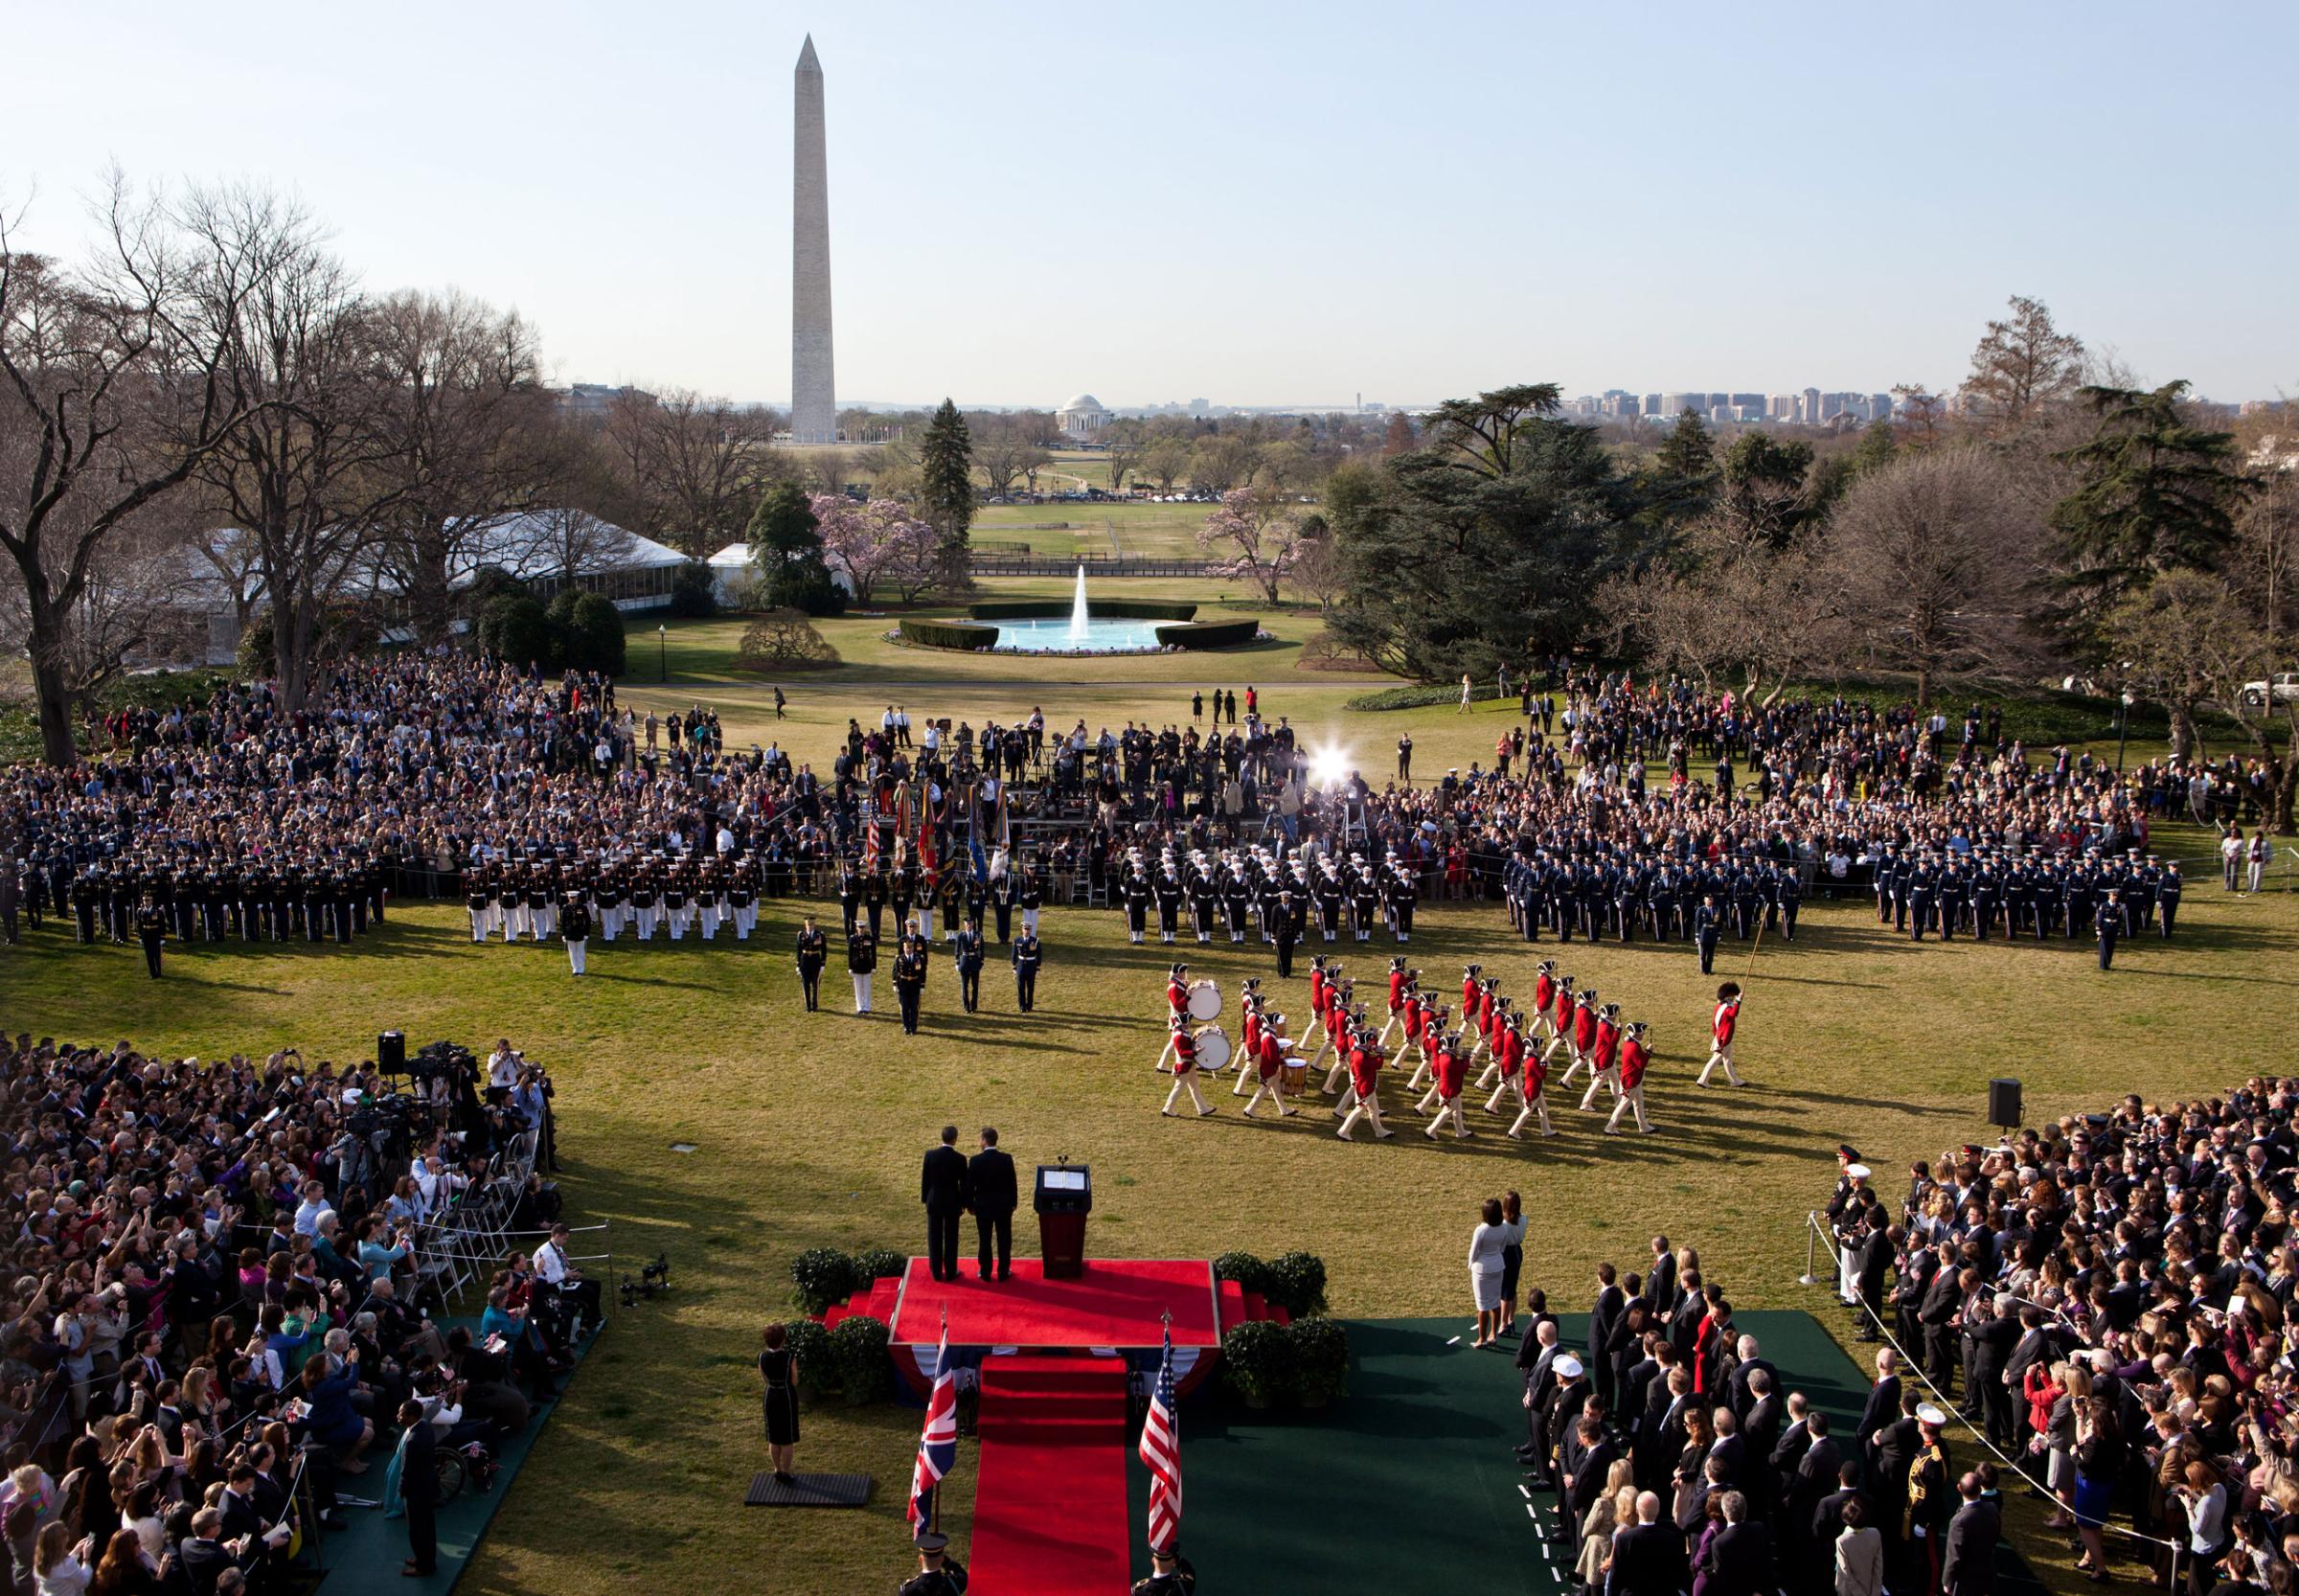 President Barack Obama and Prime Minister David Cameron of the United Kingdom watch the U.S. Army Fife and Drum Corps pass during the Official Arrival Ceremony on the South Lawn, March 14, 2012